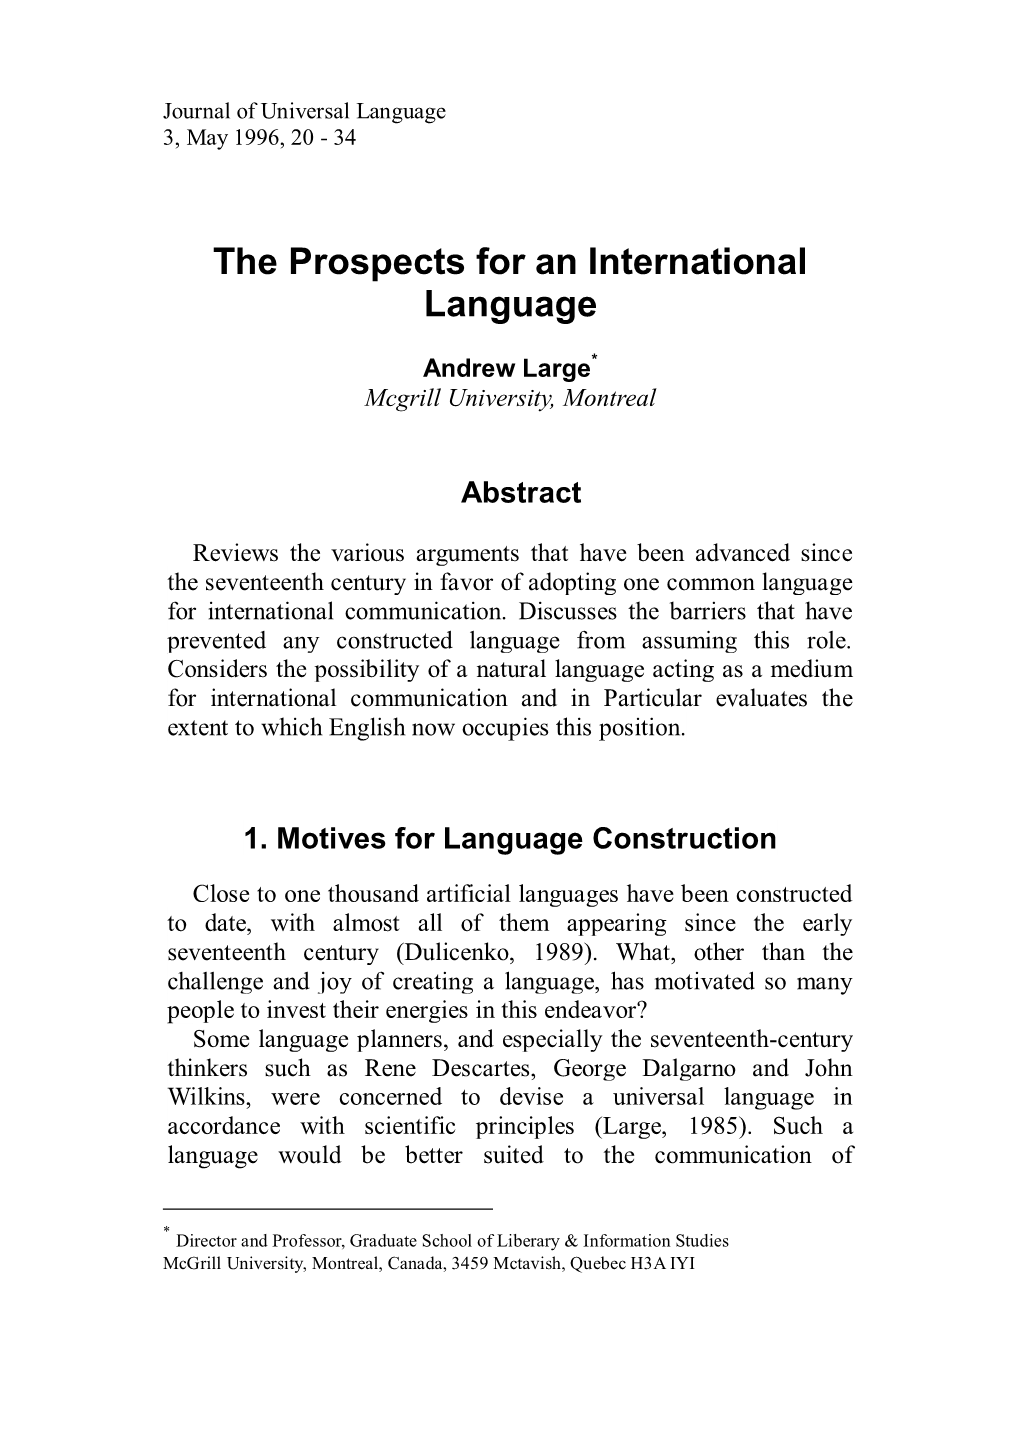 The Prospects for an International Language